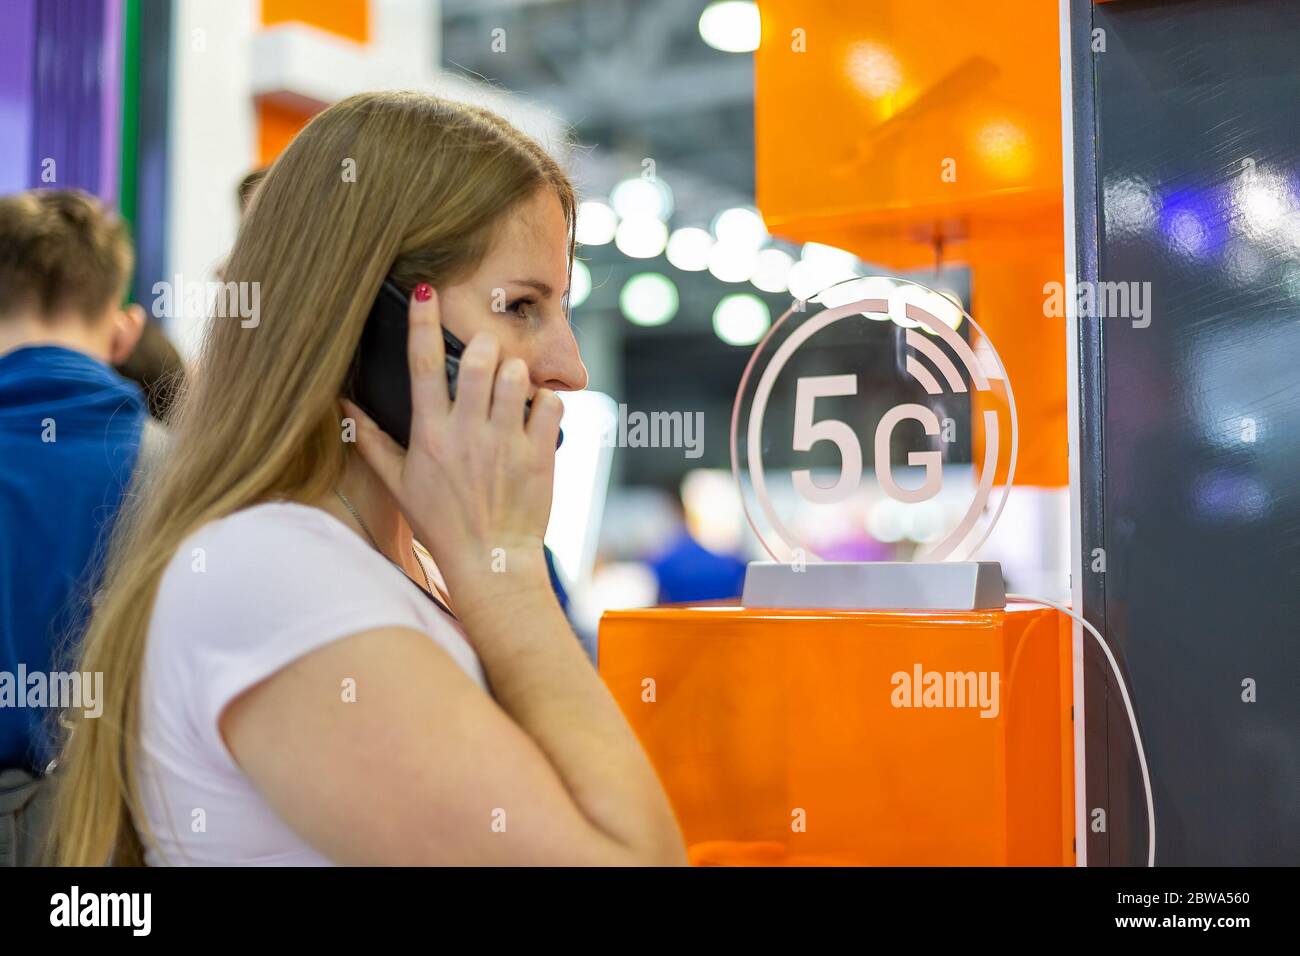 young caucasian girl talking on a smartphone on the background of the 5g icon. background blur, soft focus Stock Photo